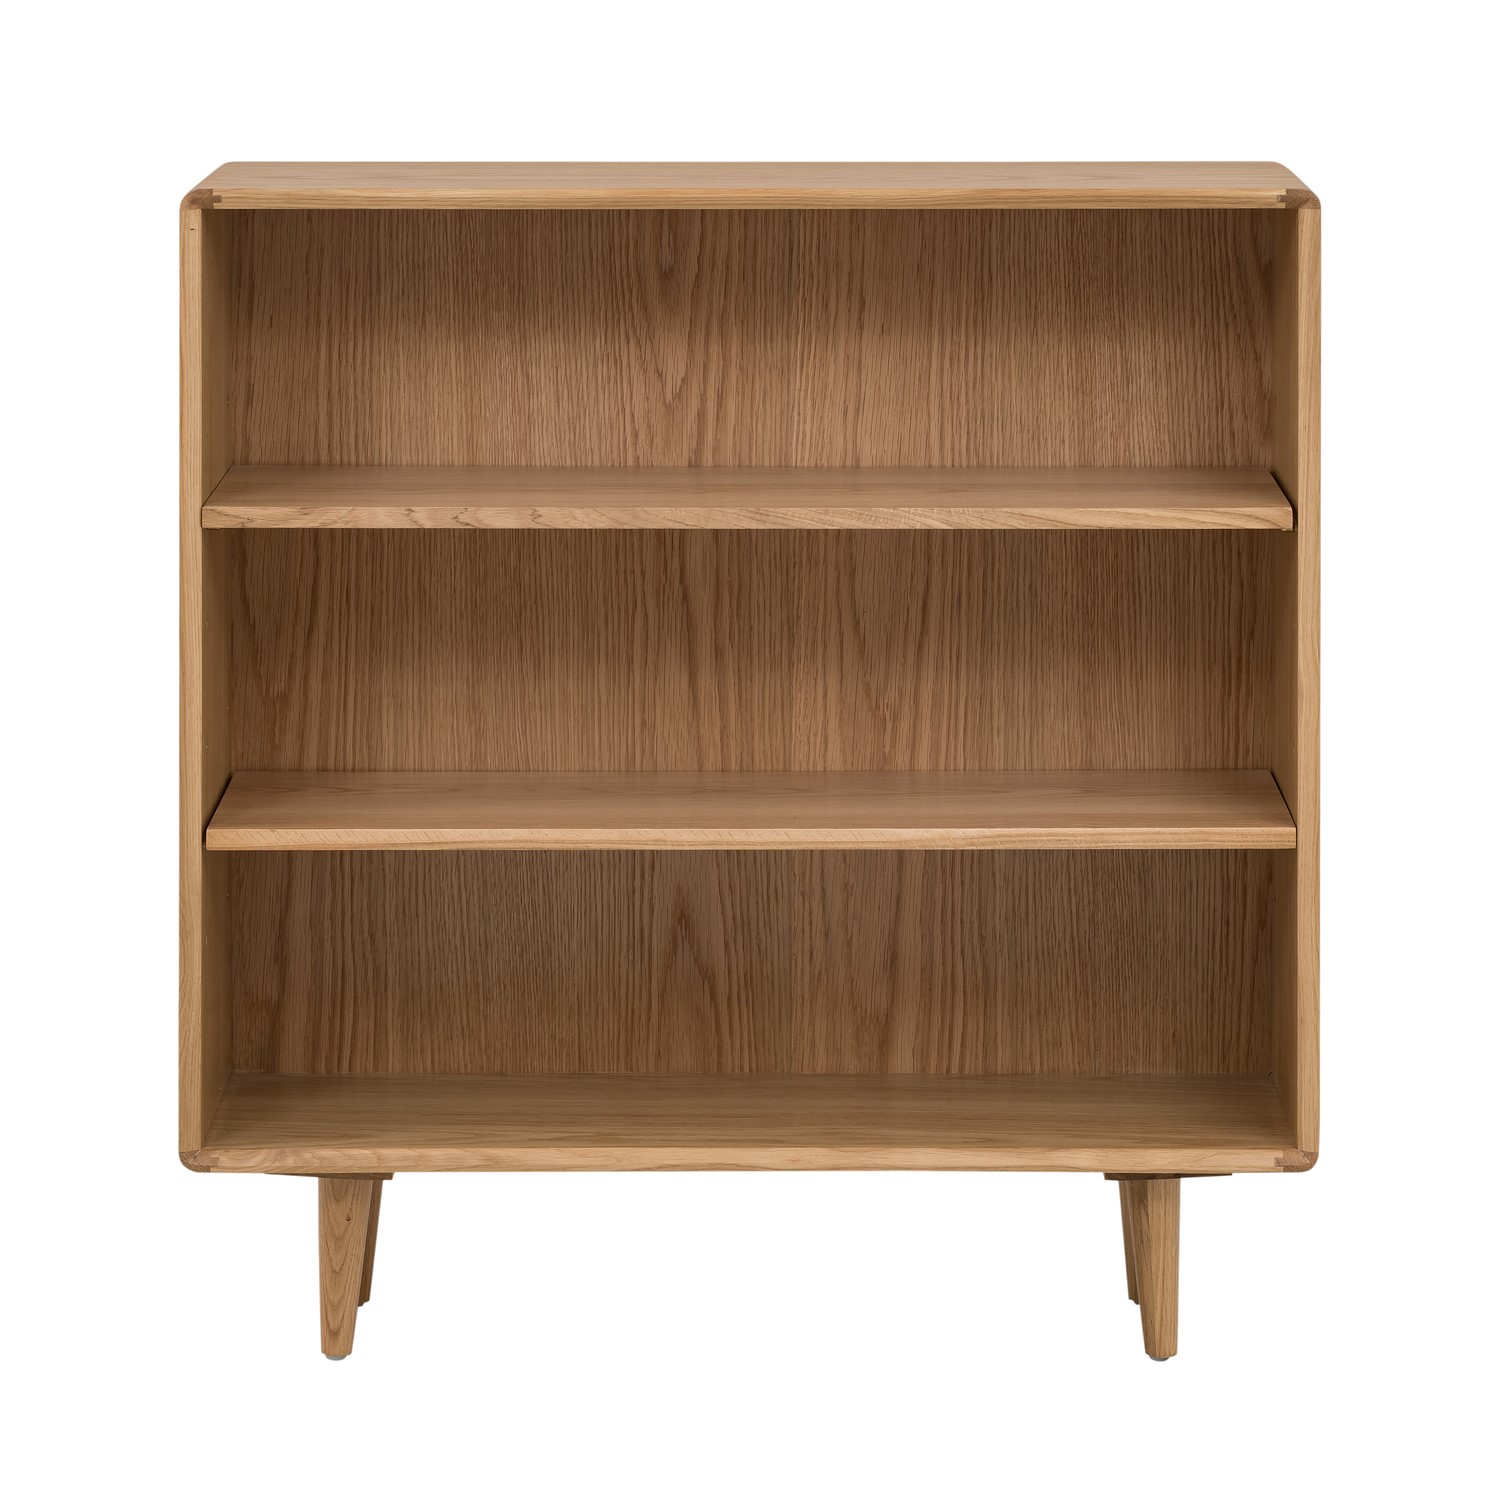 Photo of Low solid oak bookcase - manny